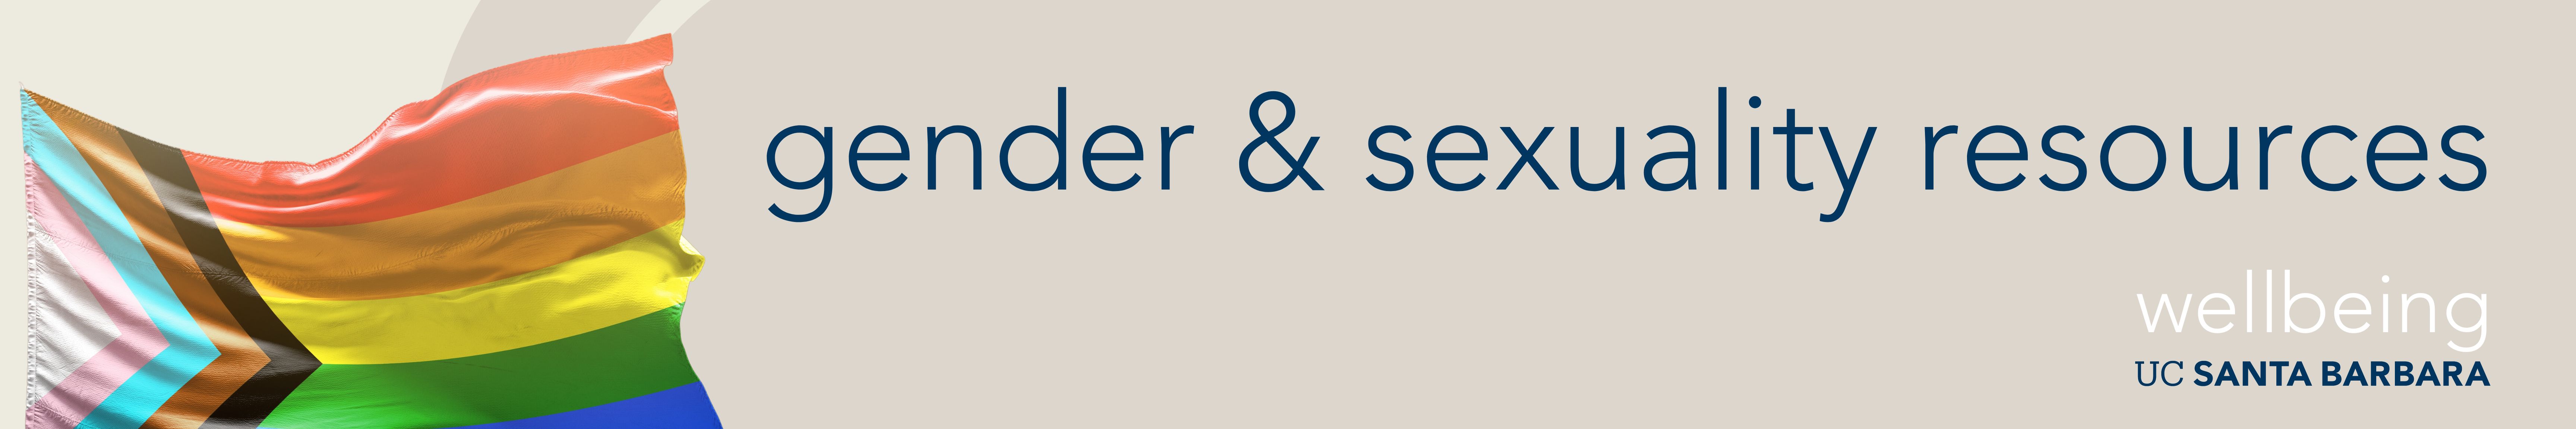 gender and sexuality banner